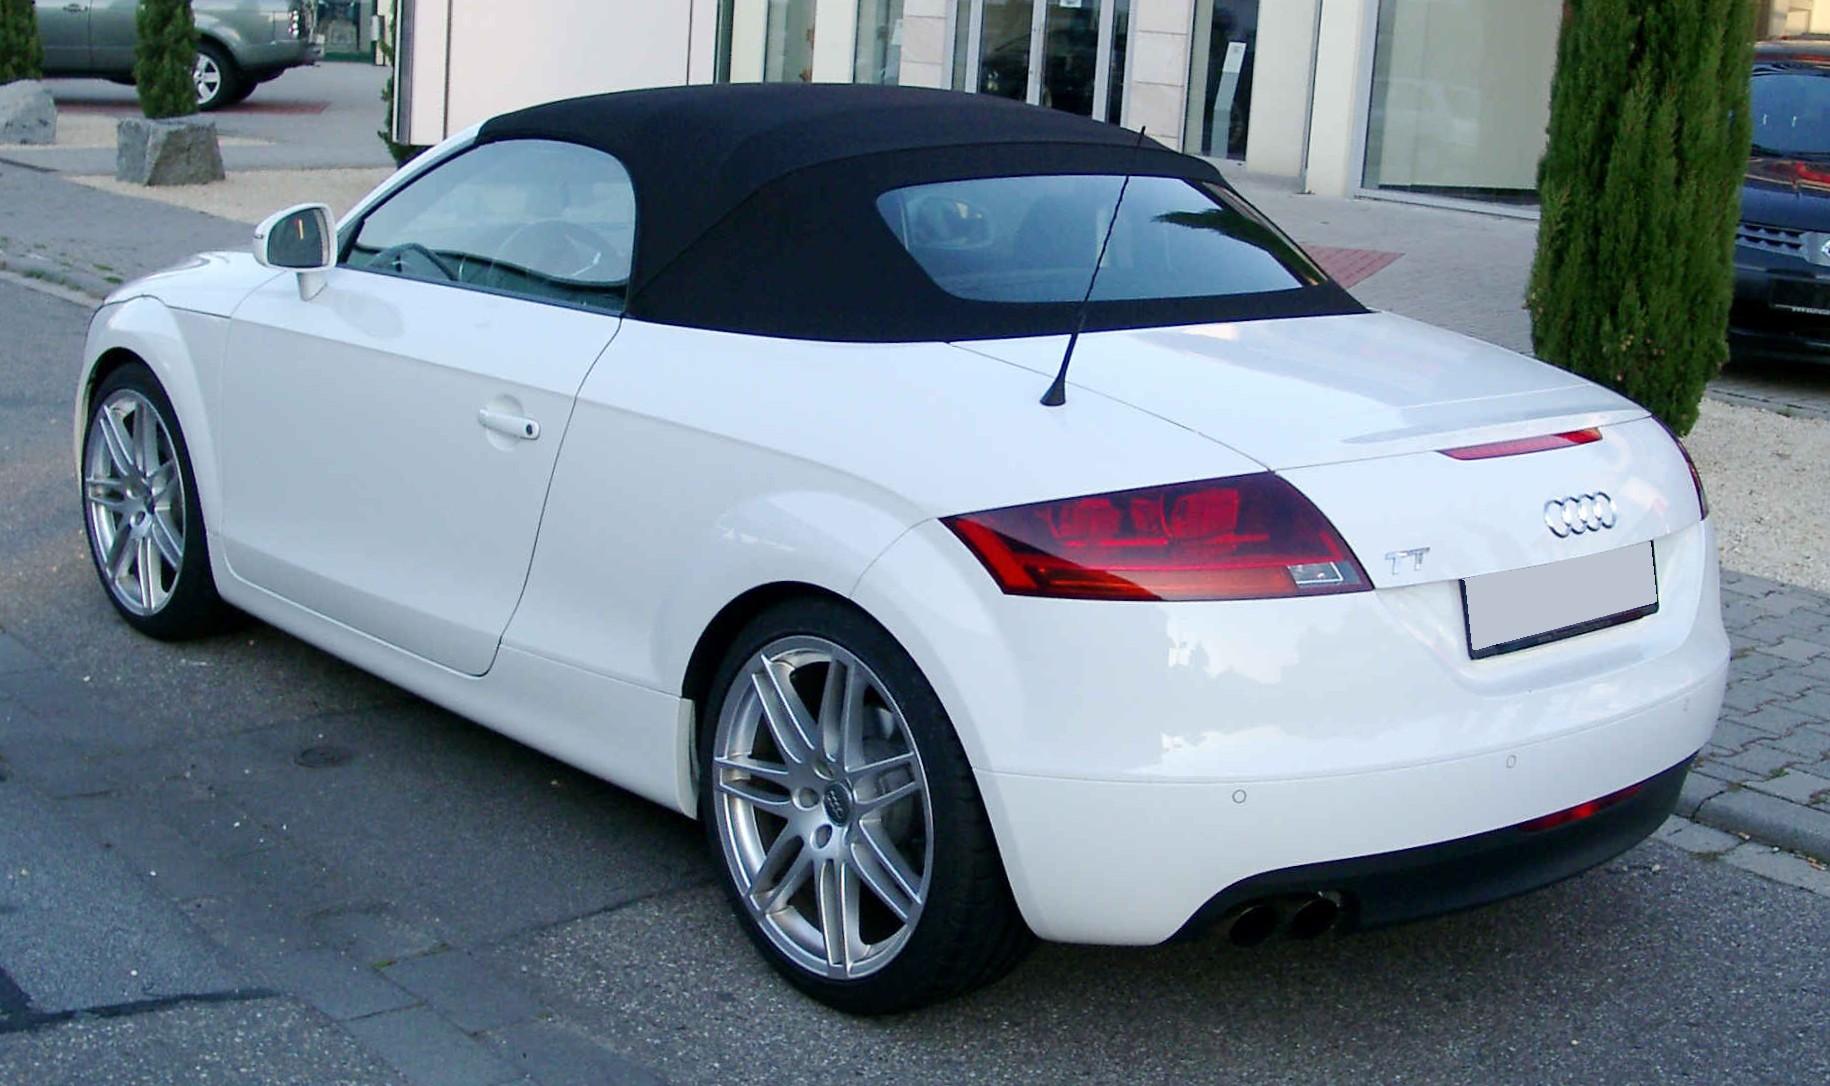 Audi Launches Production Of Next-Generation TT Roadster In Hungary